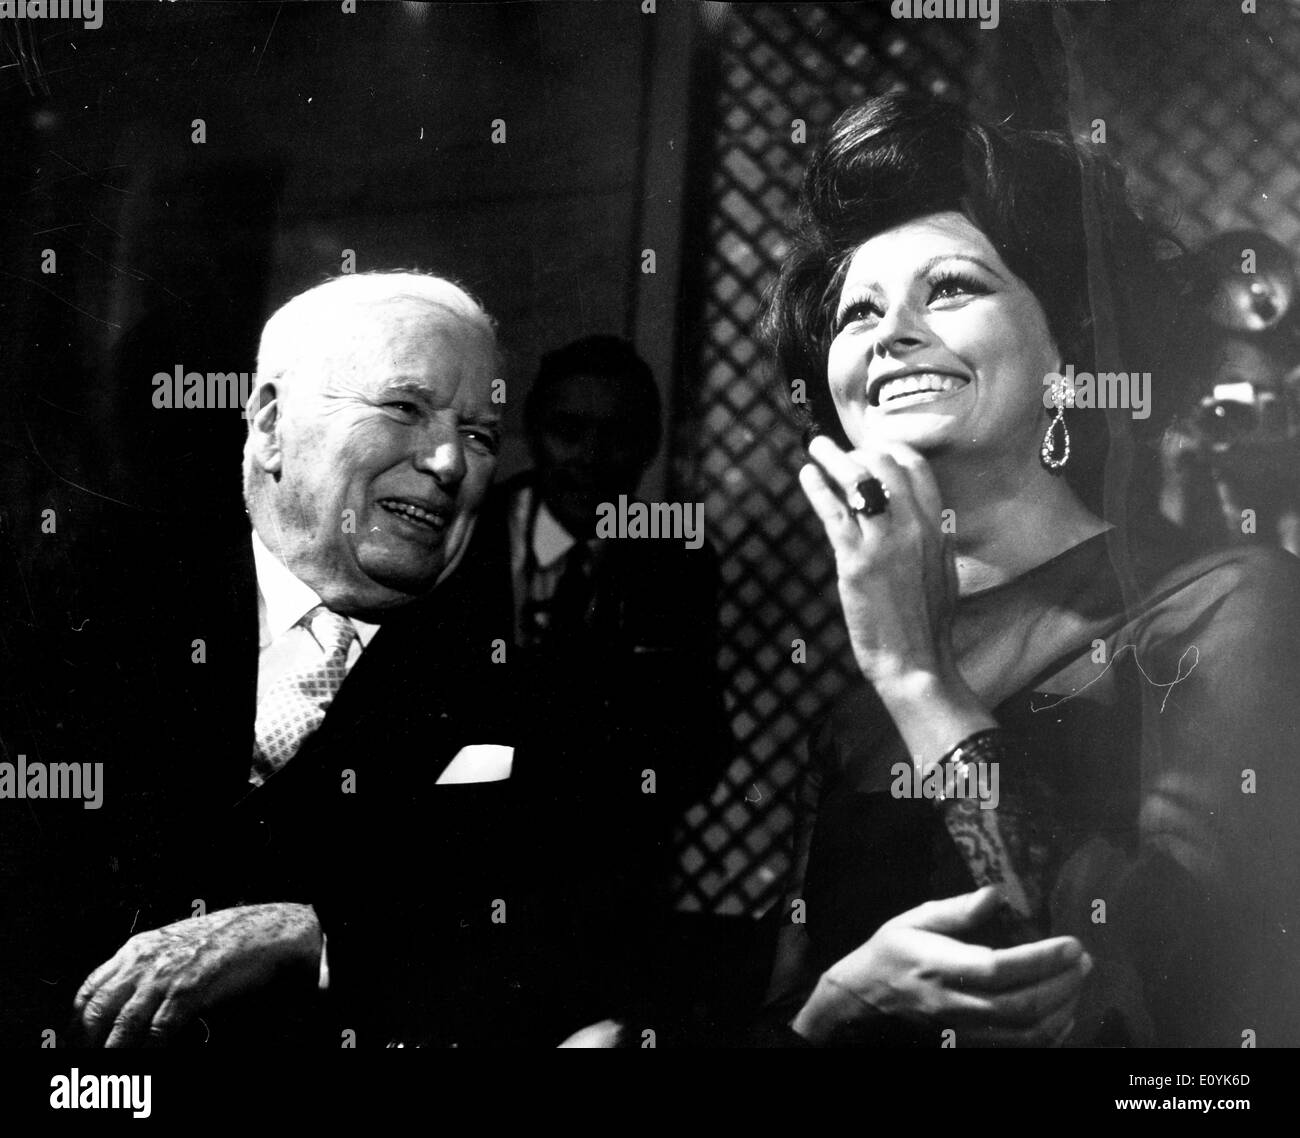 Actors Charlie Chaplin and Sophia Loren at party Stock Photo